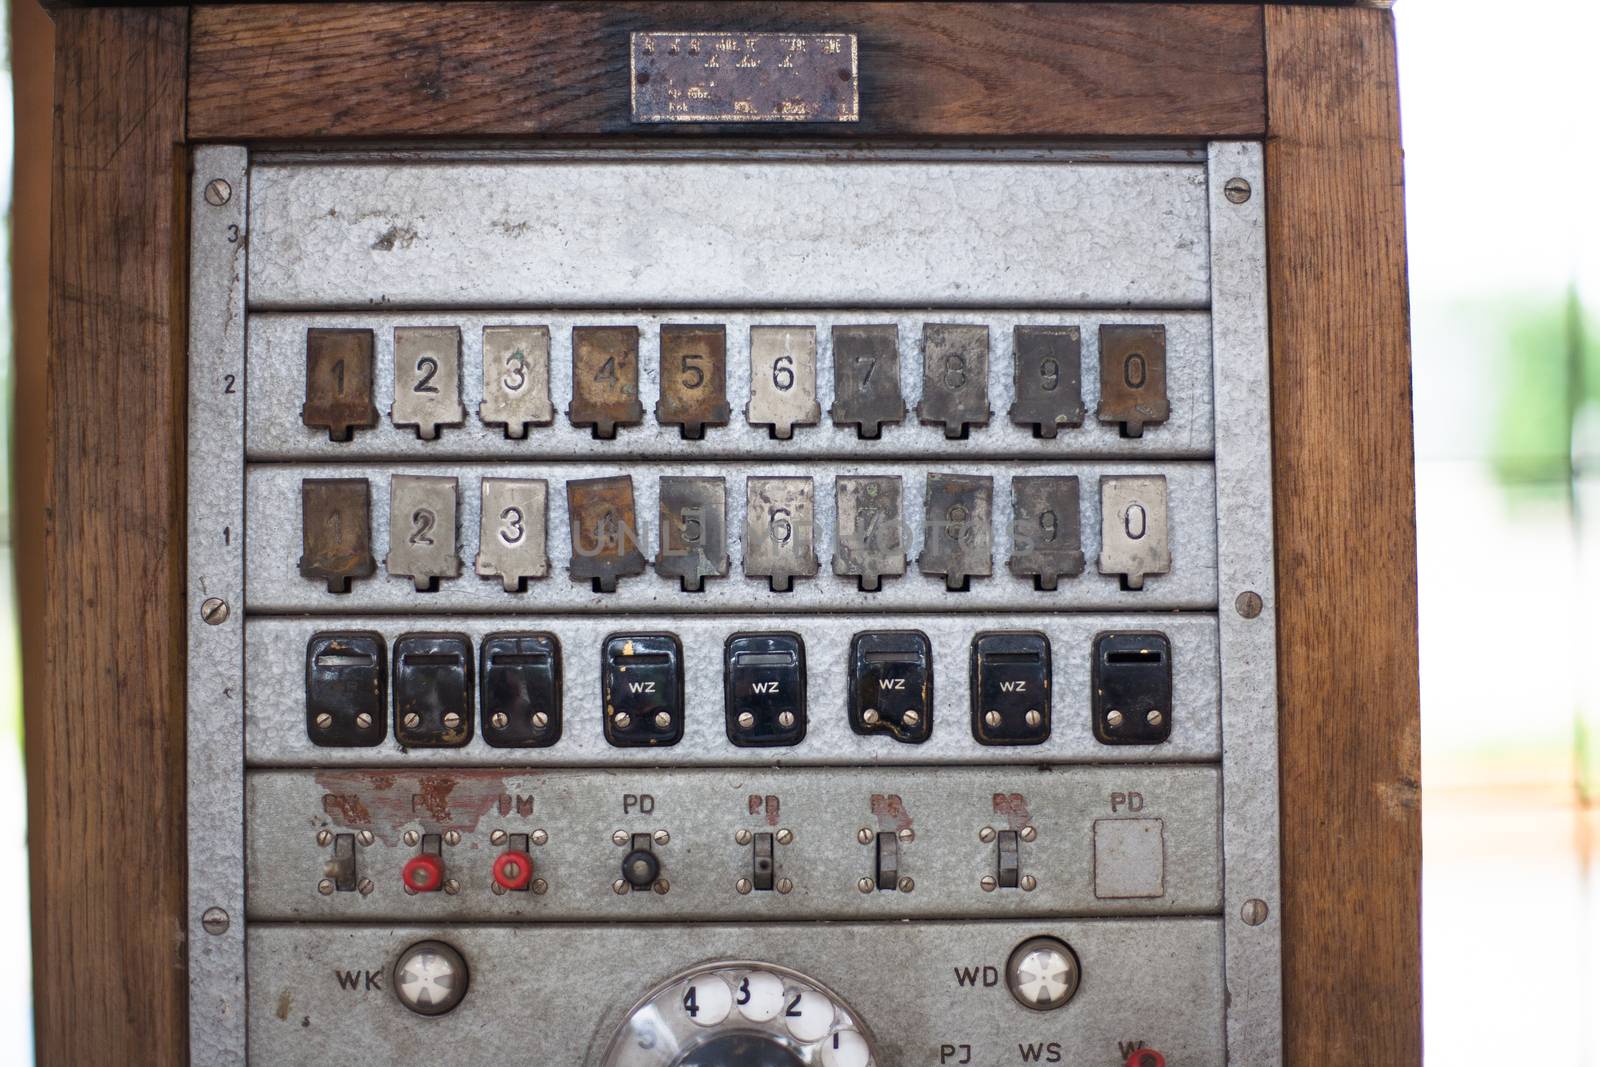 Old analog telephone station. Part of equipment